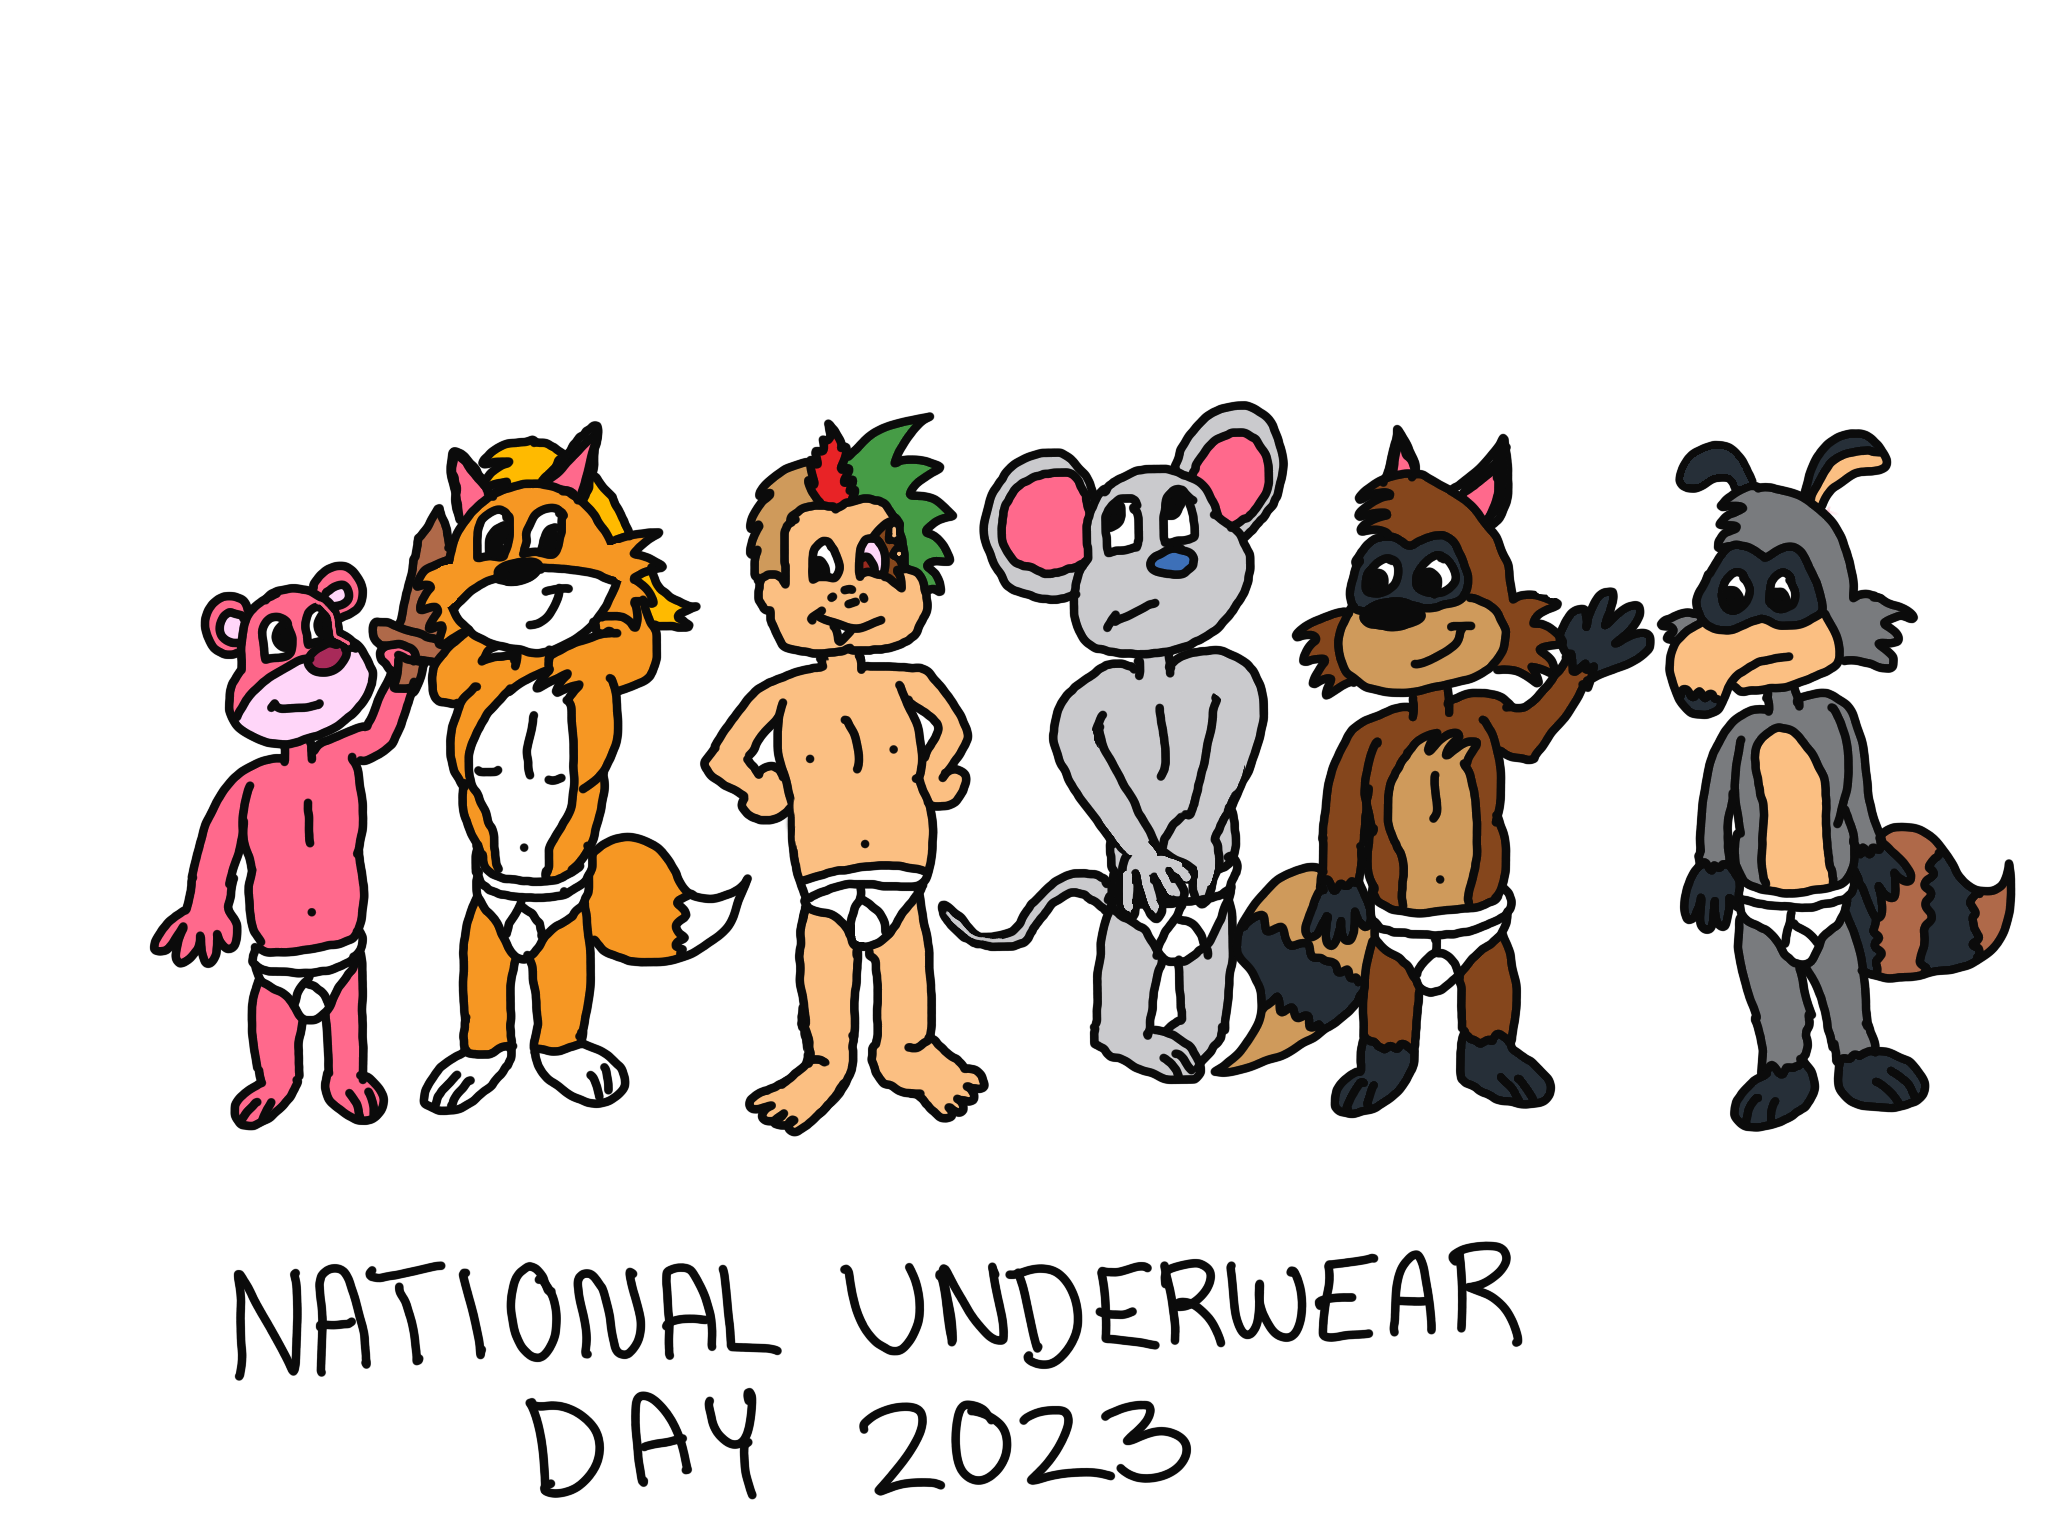 National Underwear Day 2021 (Koops) by TheMrCAGDL on Newgrounds